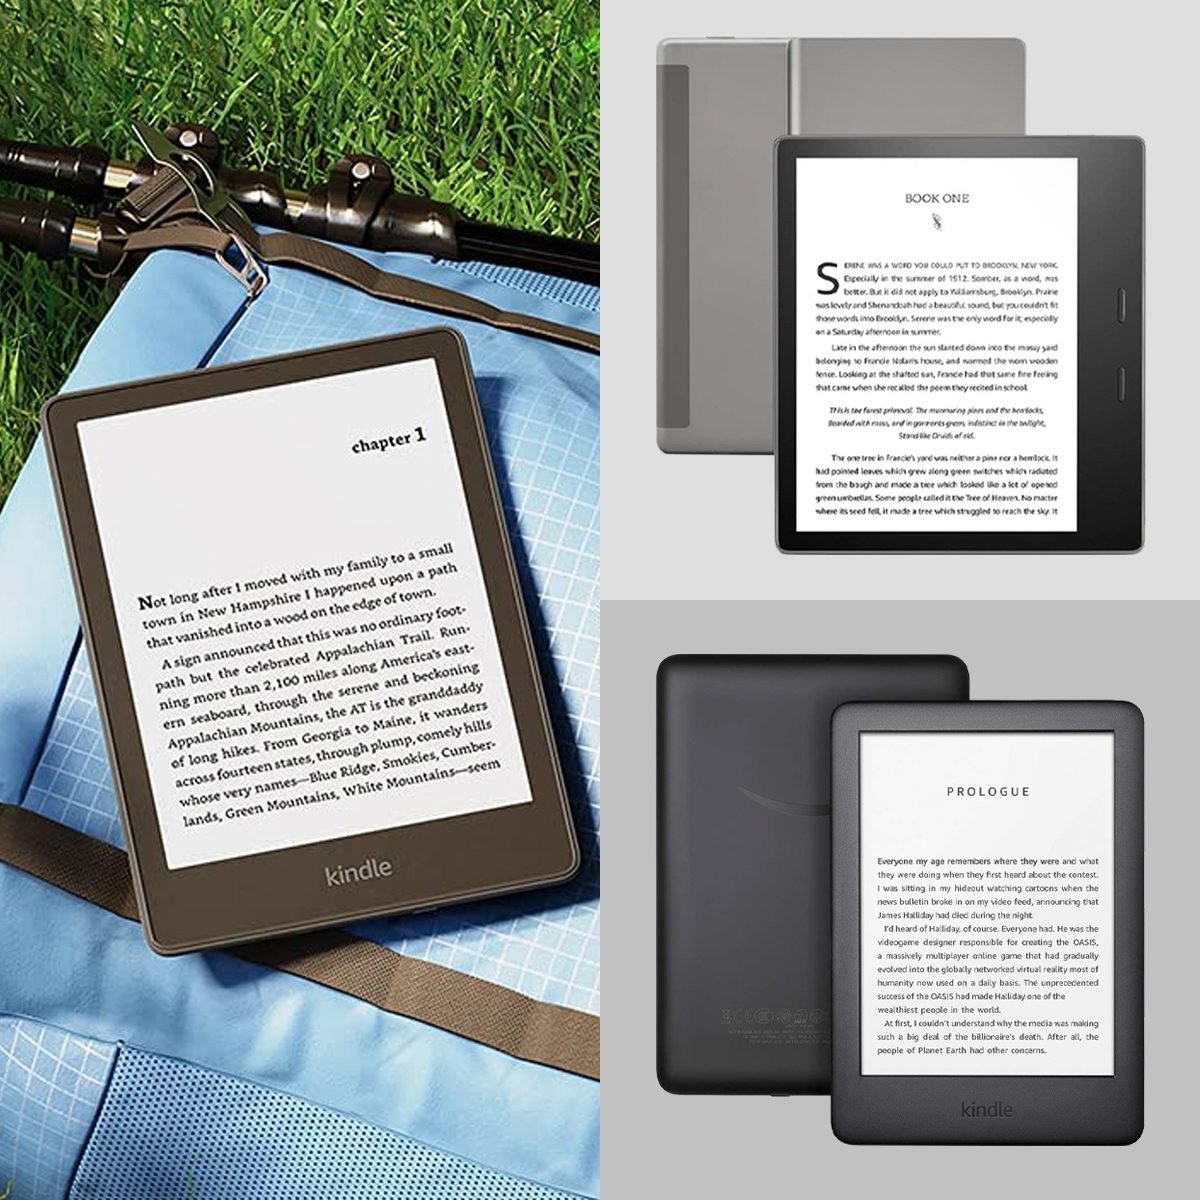 The Kindle Paperwhite Helped Me Get Back to My Hobbies